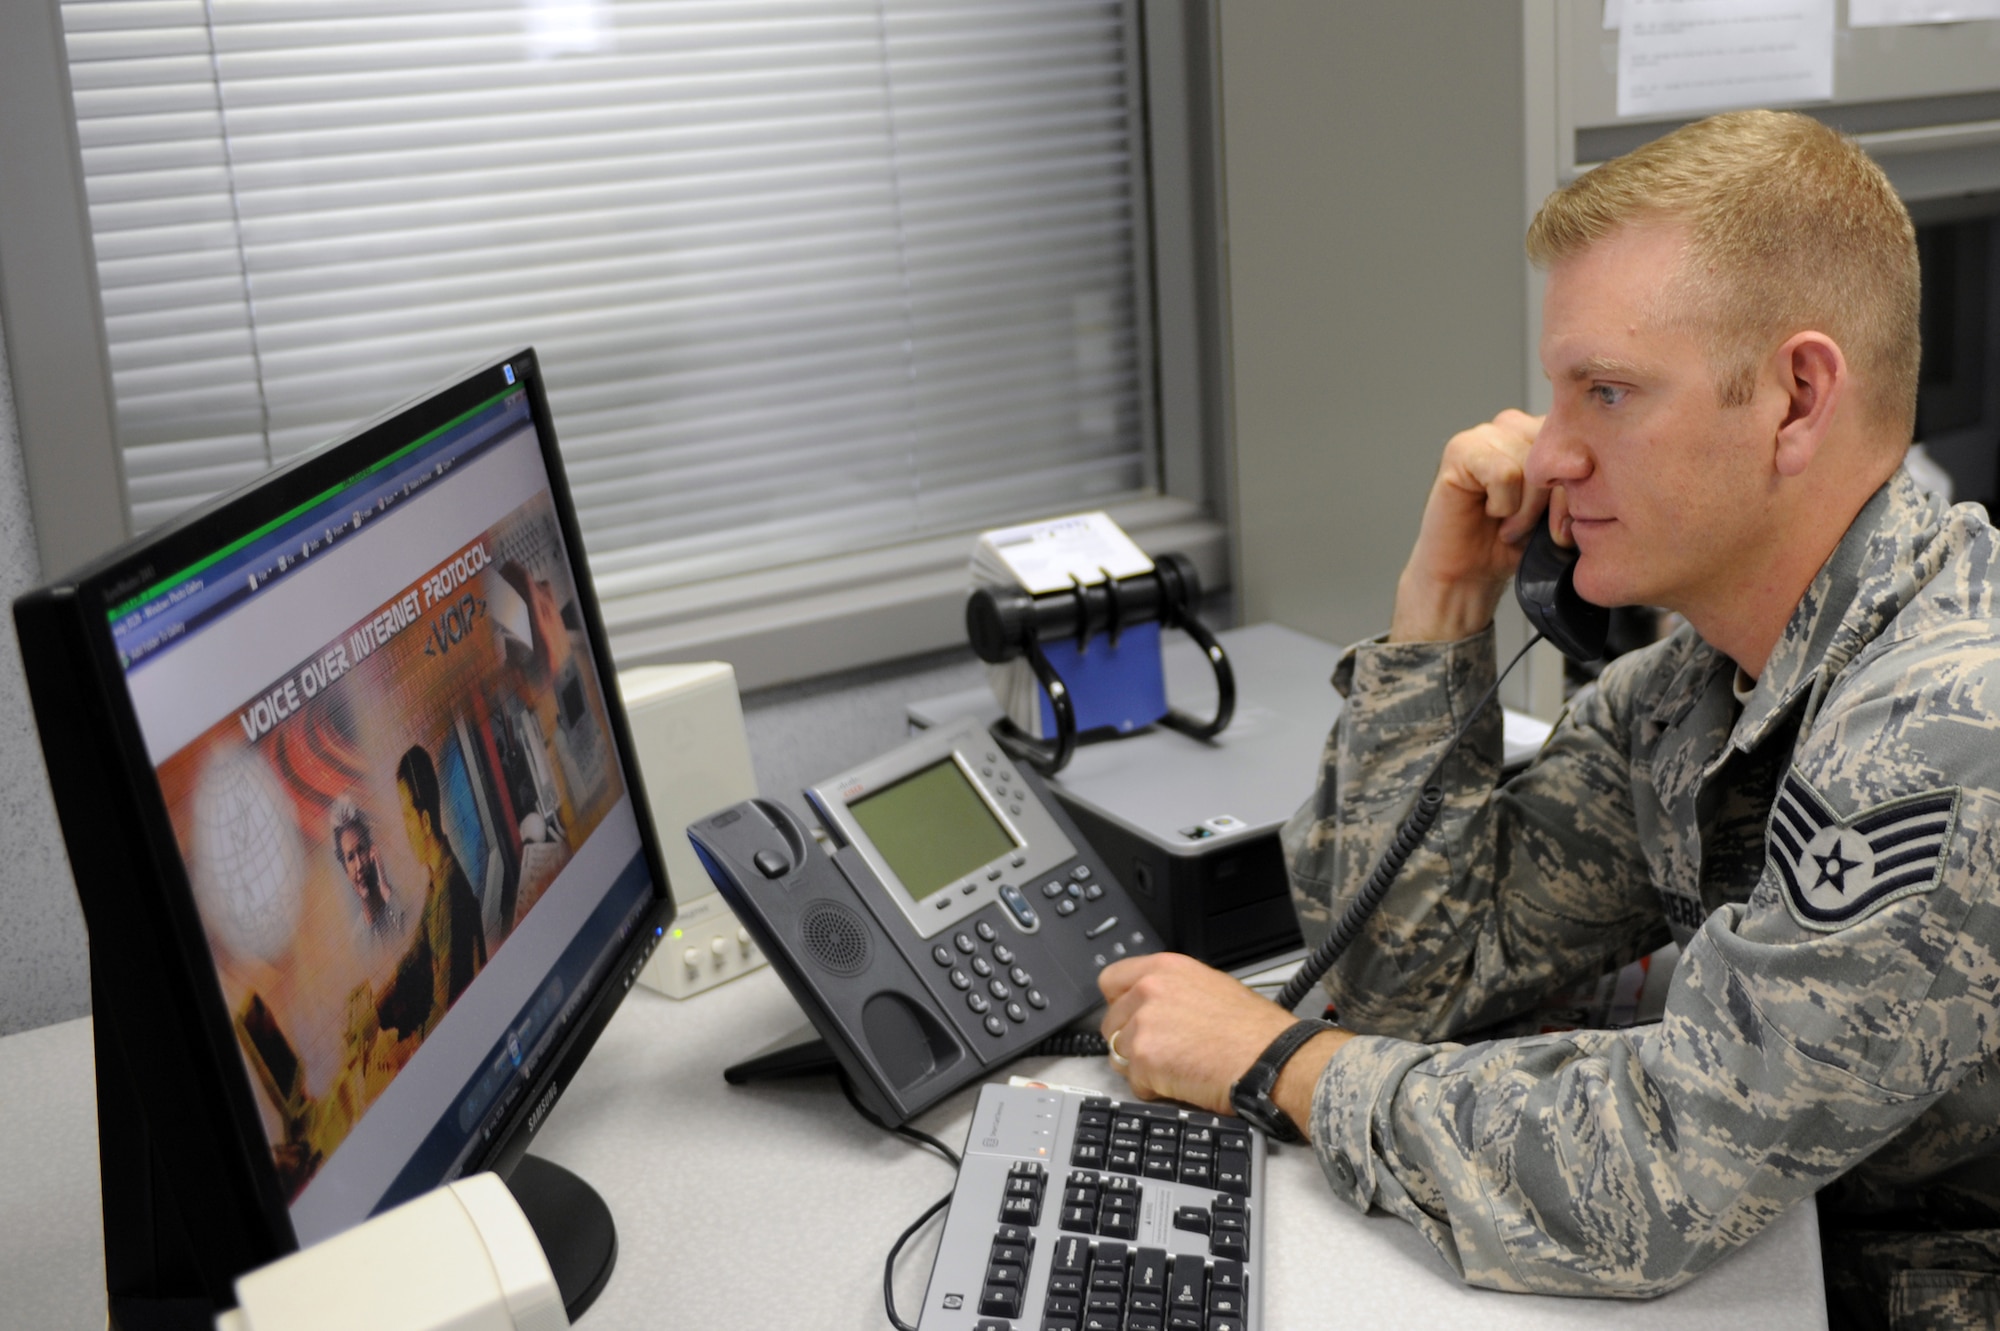 WHITEMAN AIR FORCE BASE, Mo., --Staff Sgt. Matthew, Ruggiero 509th Communications Squadron communication project manager, demonstrates how to use the new Voice over Internet Protocol phone that will be introduced here, starting early April 2010. VoIP equipment allows voice communication to travel over the Internet to its destination instead of a regular telephone landline. (U.S. Air Force photo/Staff Sgt. Jason Huddleston) (Released)